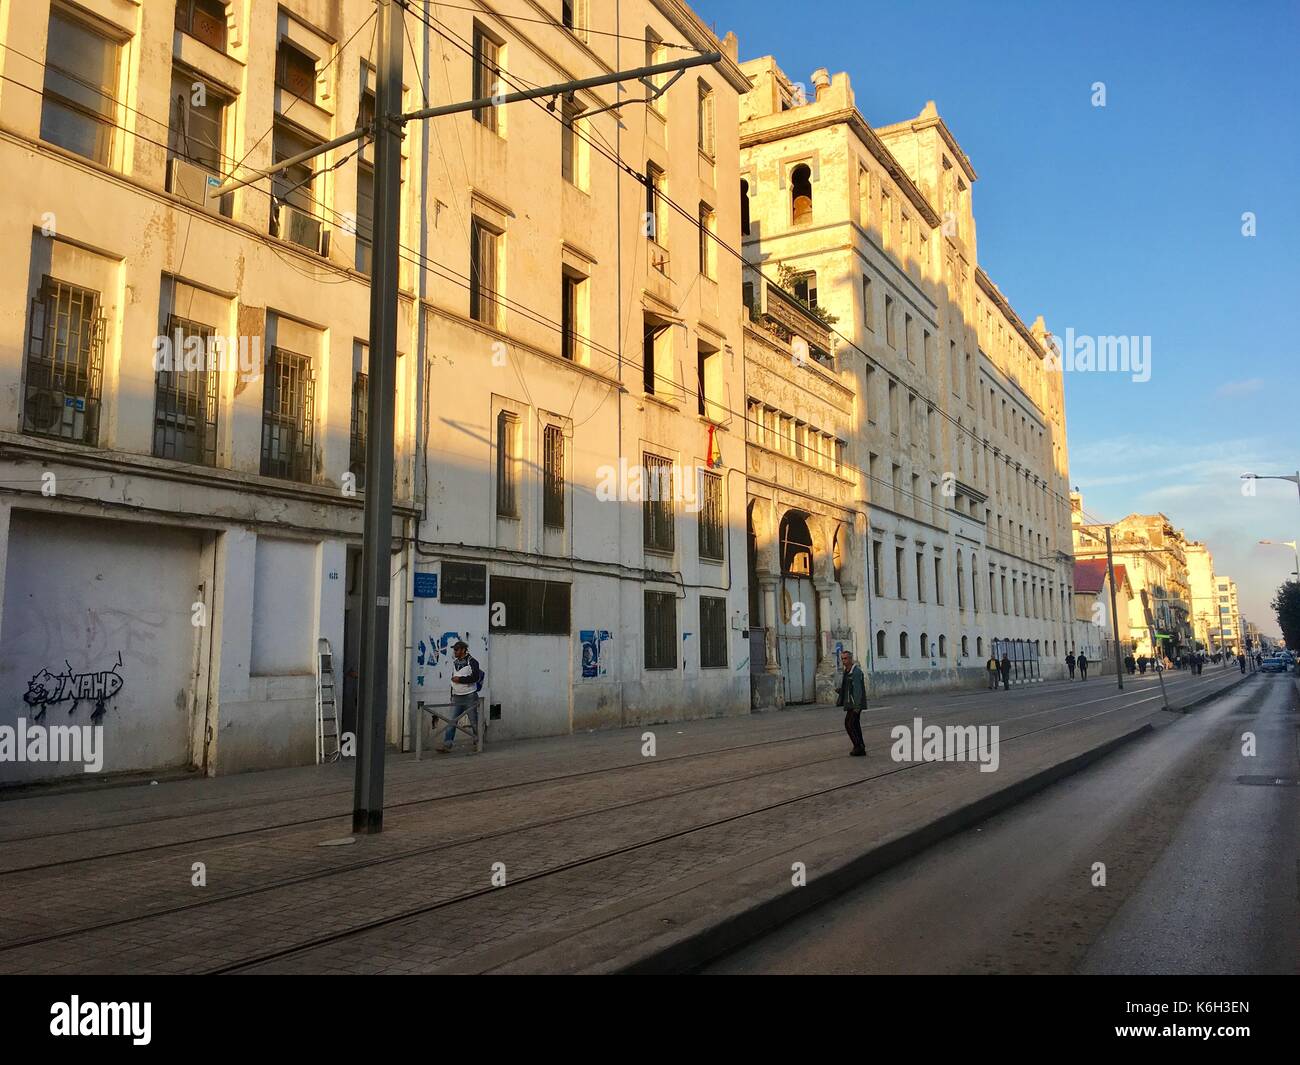 French colonial side of the city of Algiers Algeria.Modern city has many old French type buildings. Stock Photo